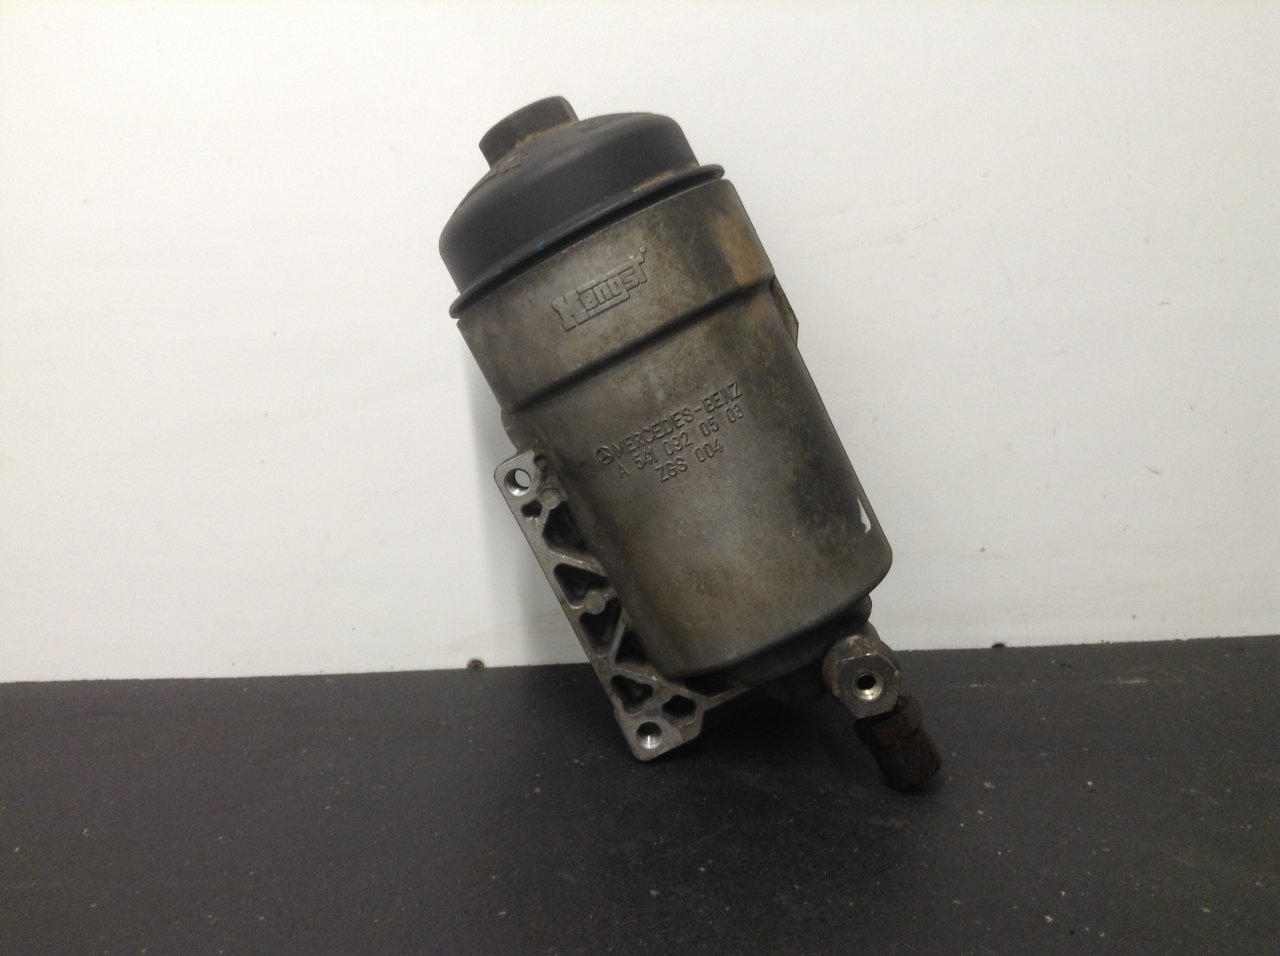 Mercedes MBE4000 Fuel Filter Assembly - A5410920503